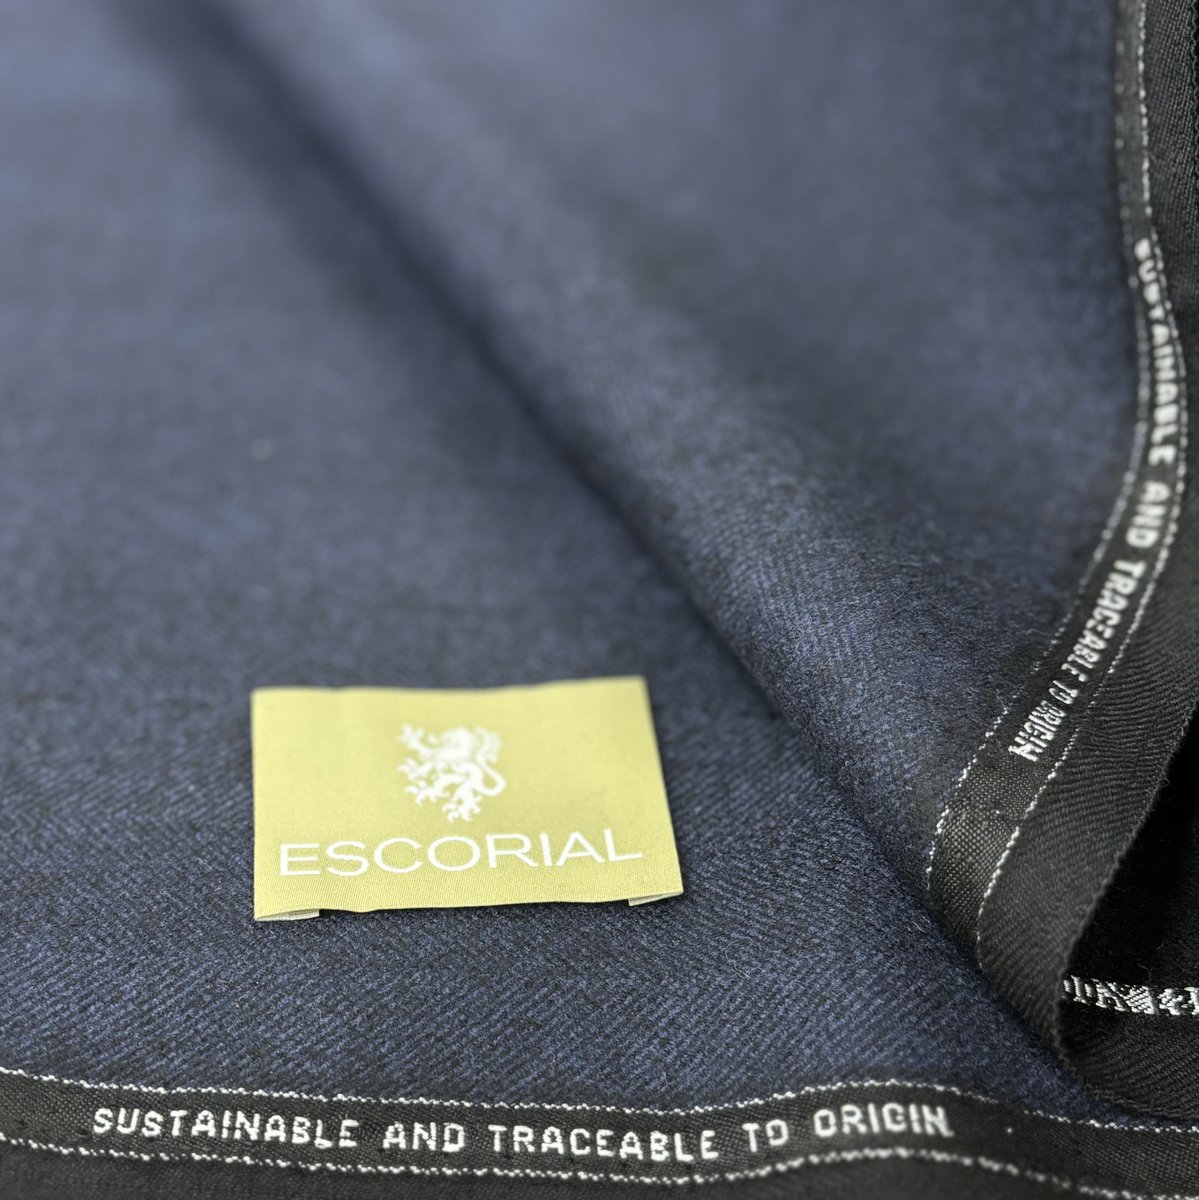 Wrap yourself in unmatched quality and warmth with our 100% Escorial wool overcoating. 🧥 Let the exquisite double cloth construction and 650 gram weight redefine your winter wardrobe. Explore more atwww.kabbanitextiles.com/product-page/b… #StayCozy #QualityCraftsmanship #WinterEssentials #wool